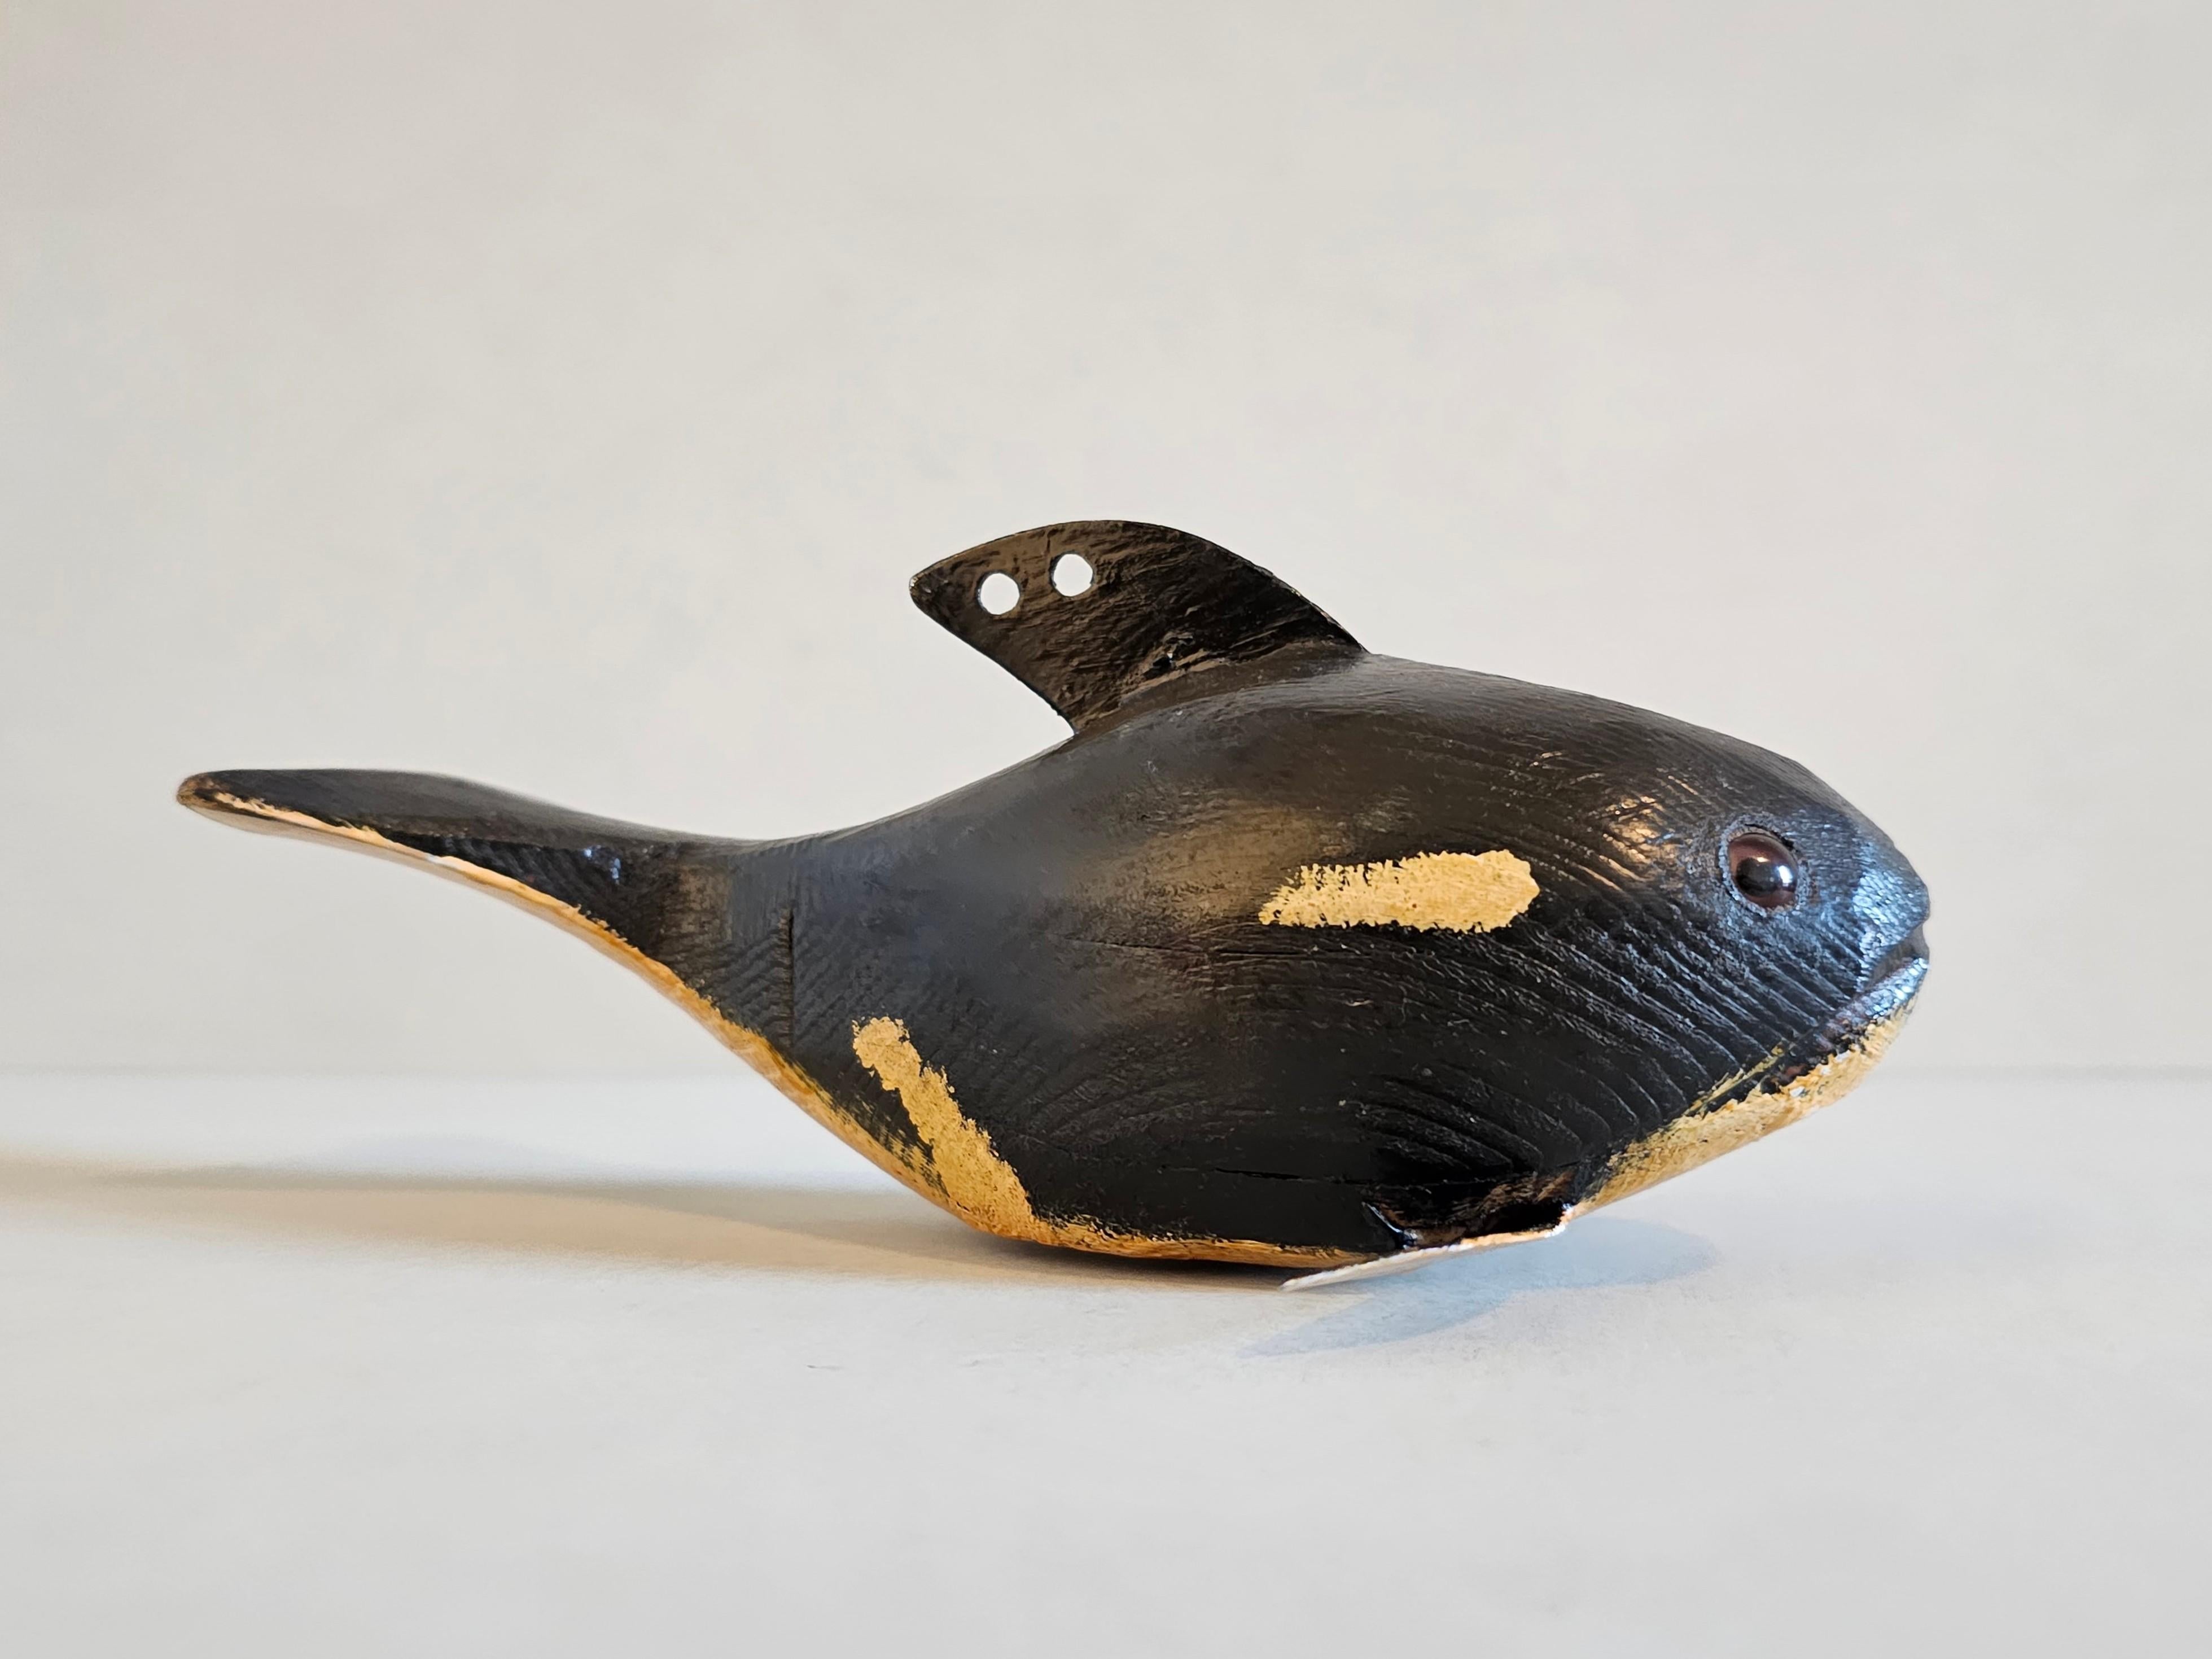 A scarce early Duluth Fish Decoy American folk art sculpture, depicting a Orca killer whale, hand-carved by the late David Earl Perkins (Duluth, Minnesota, 1934-2018), featuring the realistic original hand-painted black finish with cream white